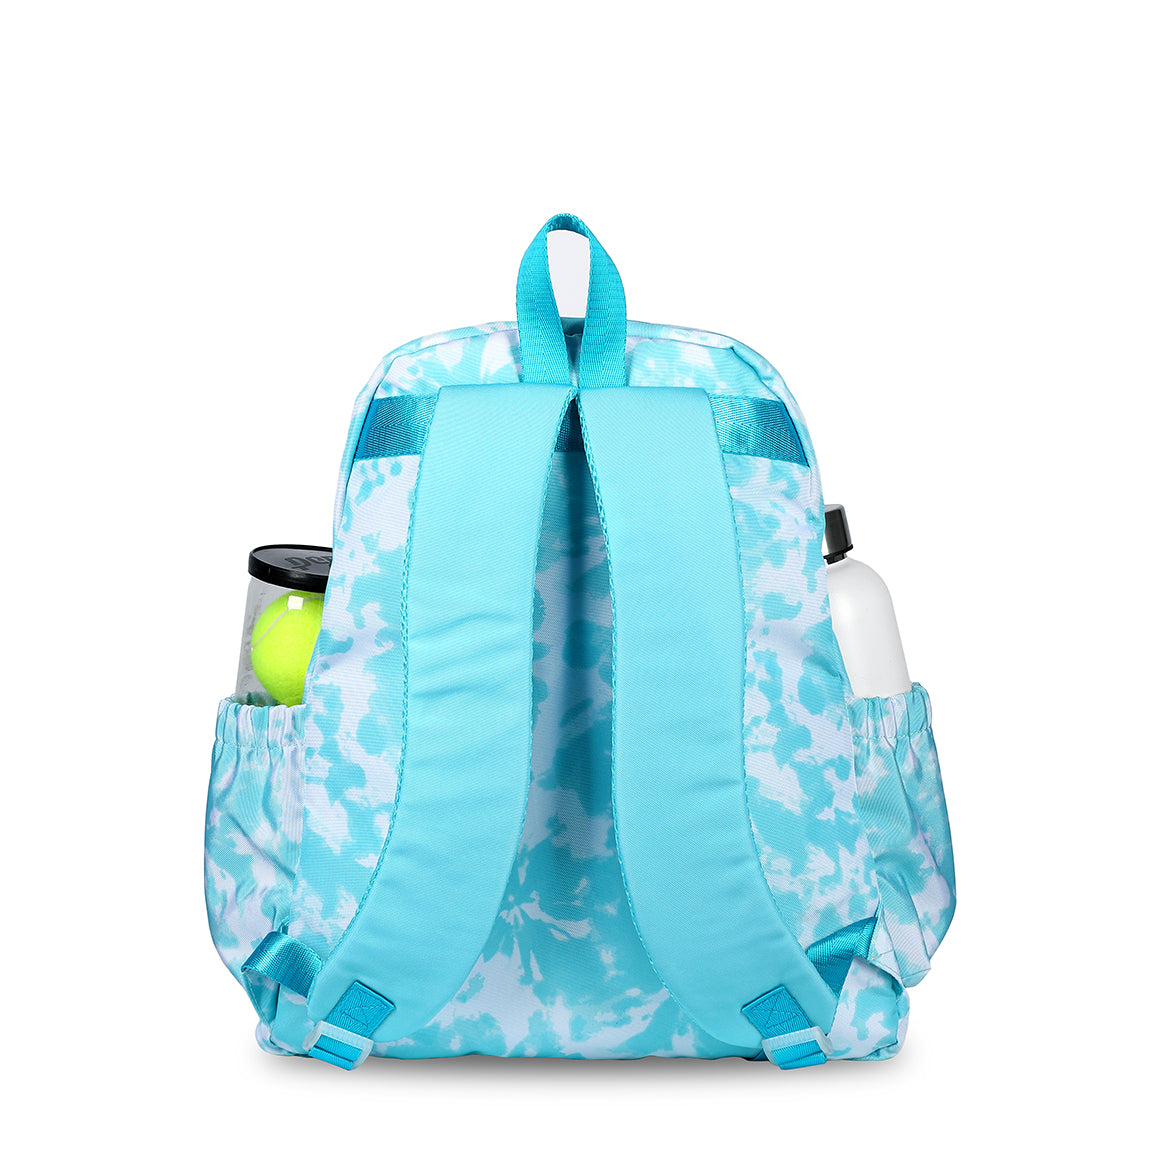 Back view of aqua blue tie dye pattern game on tennis backpack. Tennis backpack has water bottle and tennis balls in side pockets.